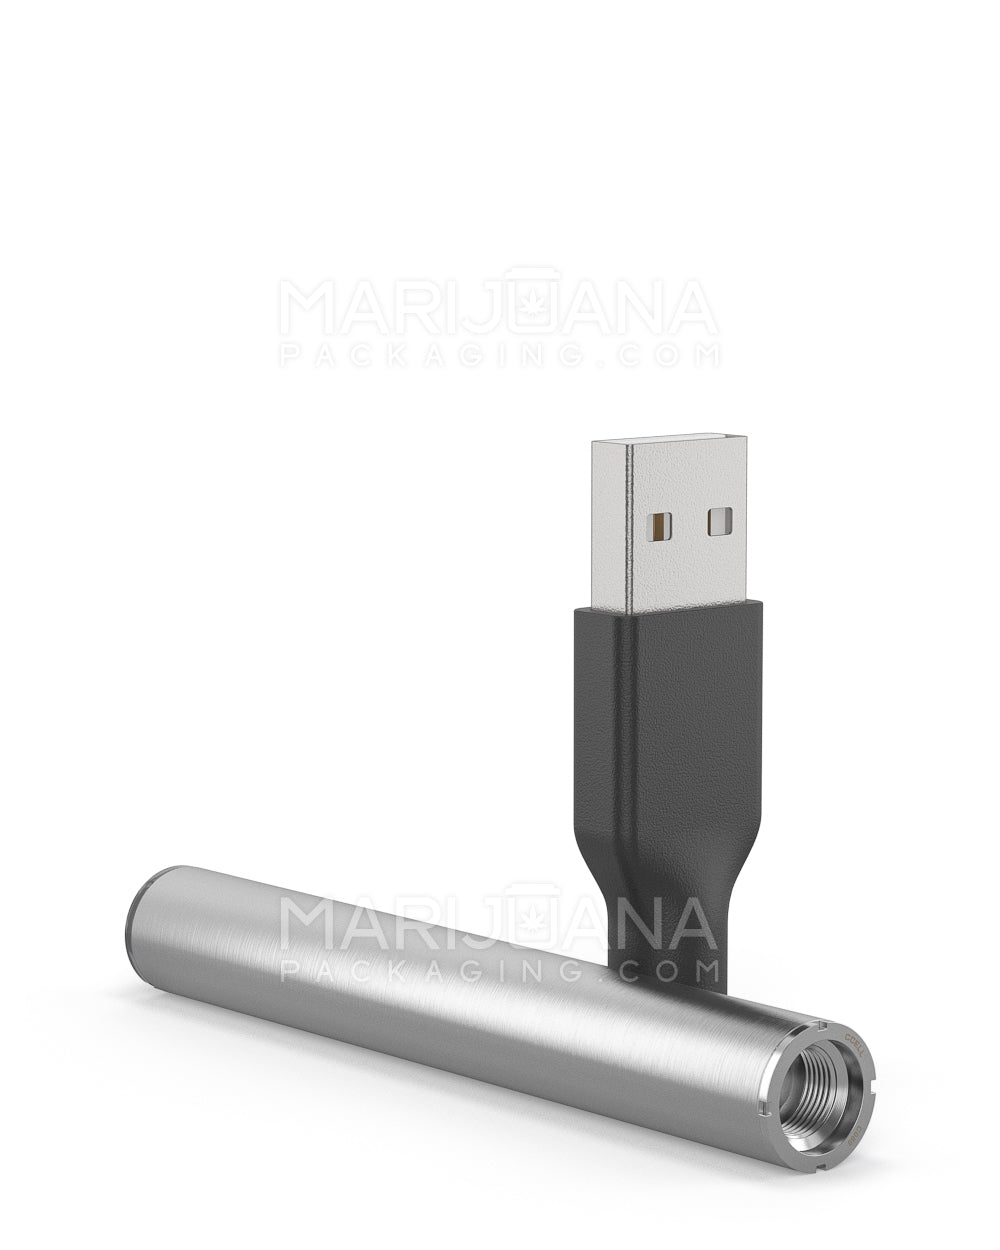 CCELL | M3 Vape Batteries with USB Charger | 340mAh - Silver - 100 Count